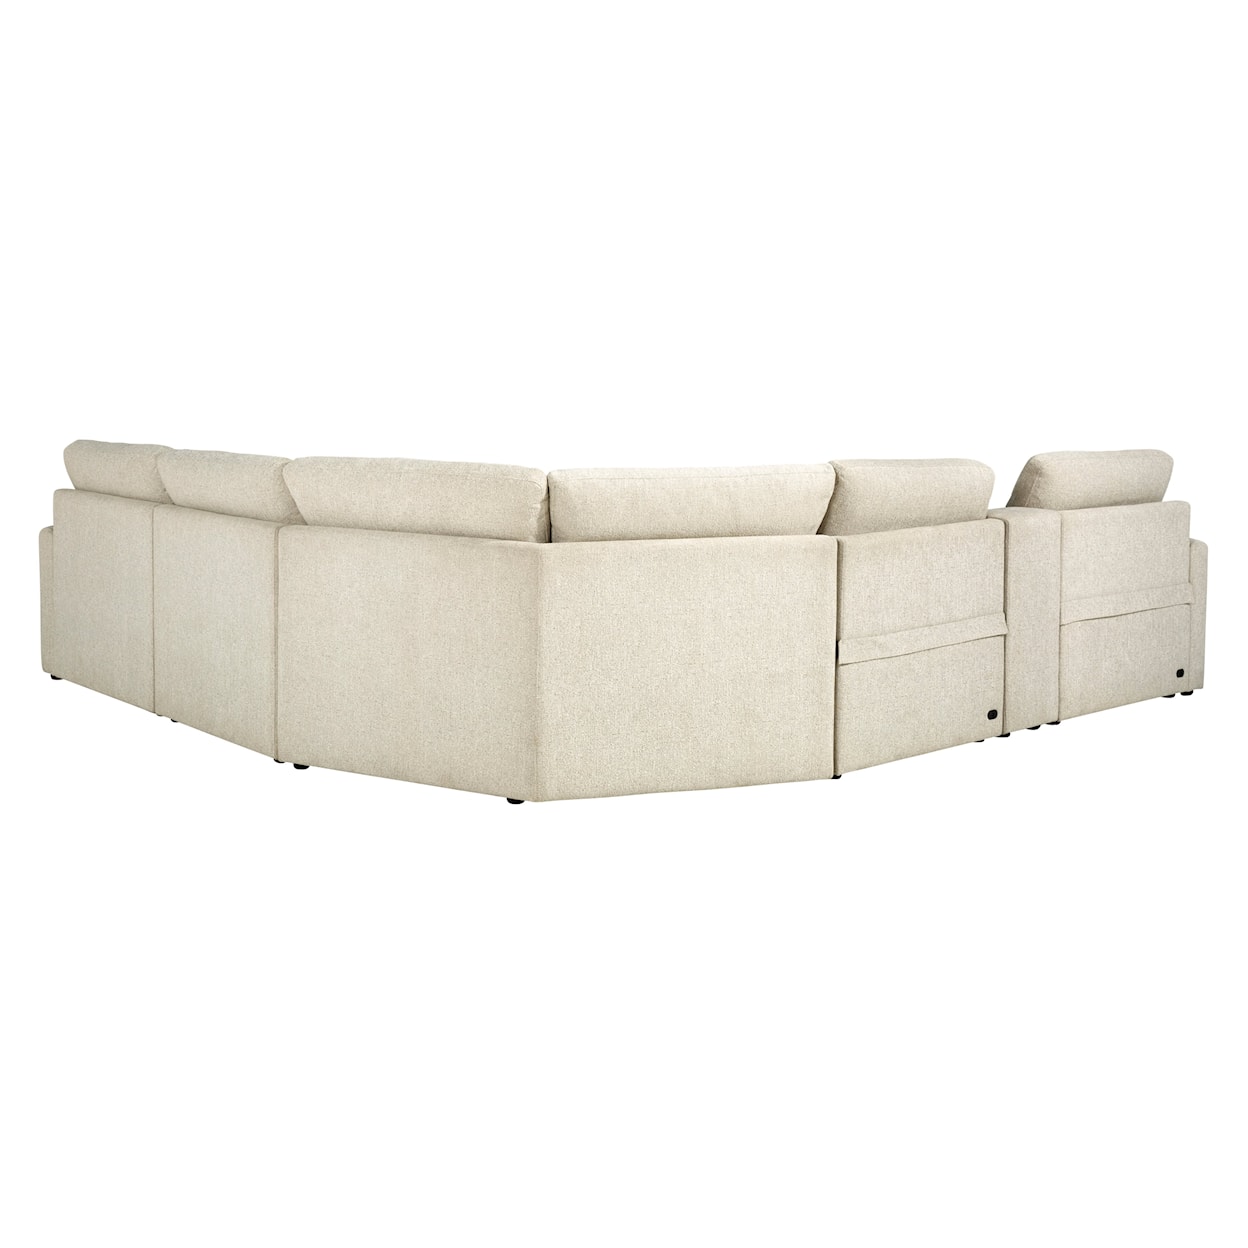 Signature Design Hartsdale 6-Piece Power Reclining Sectional